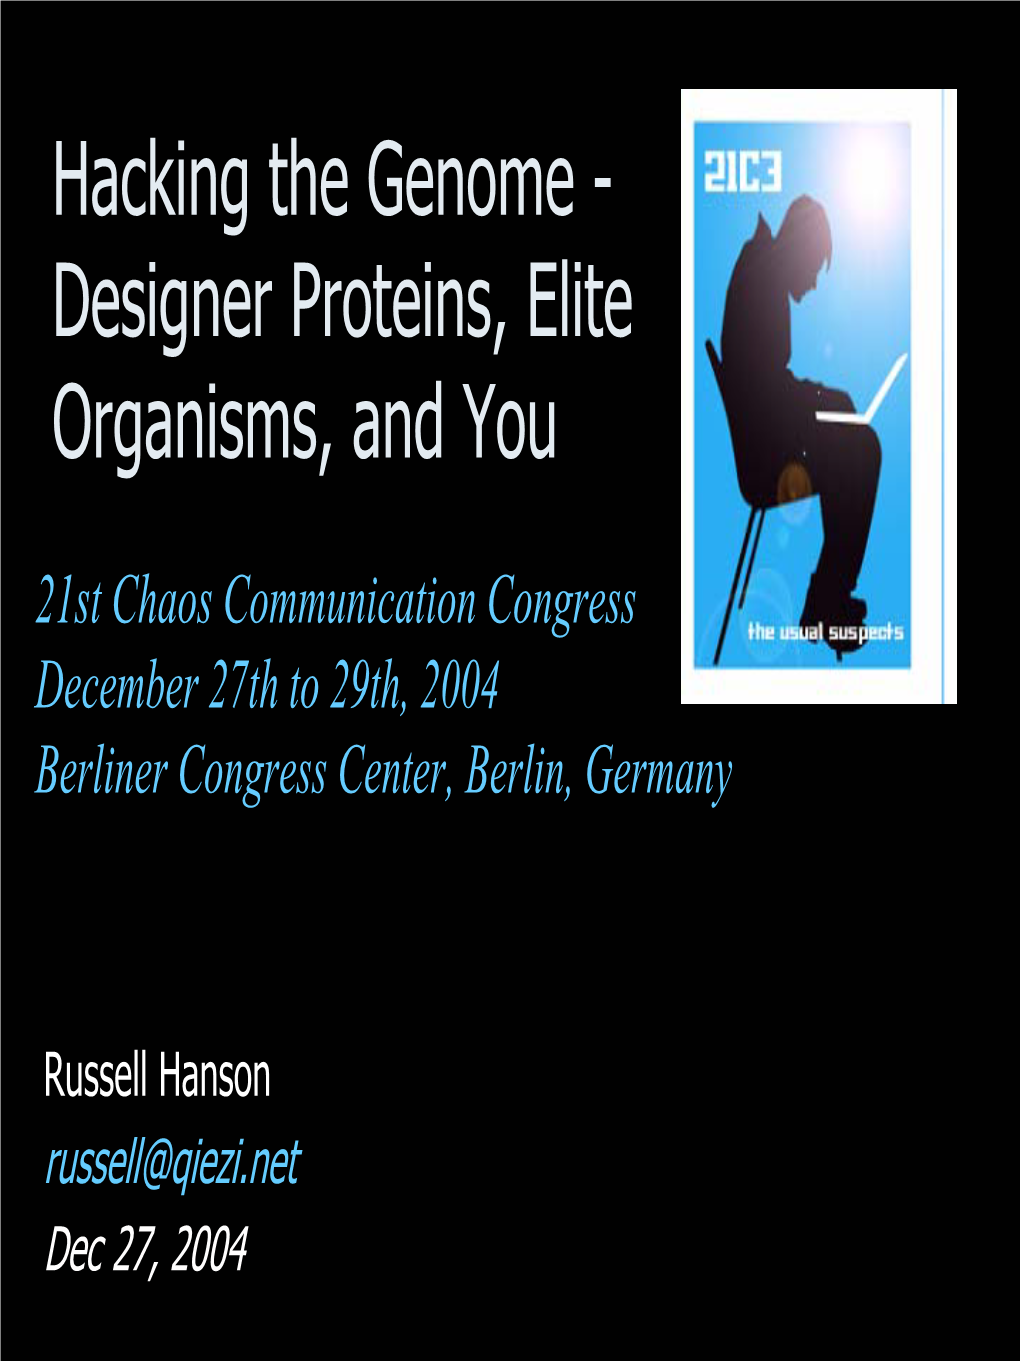 Hacking the Genome: Designer Proteins, Elite Organisms, And